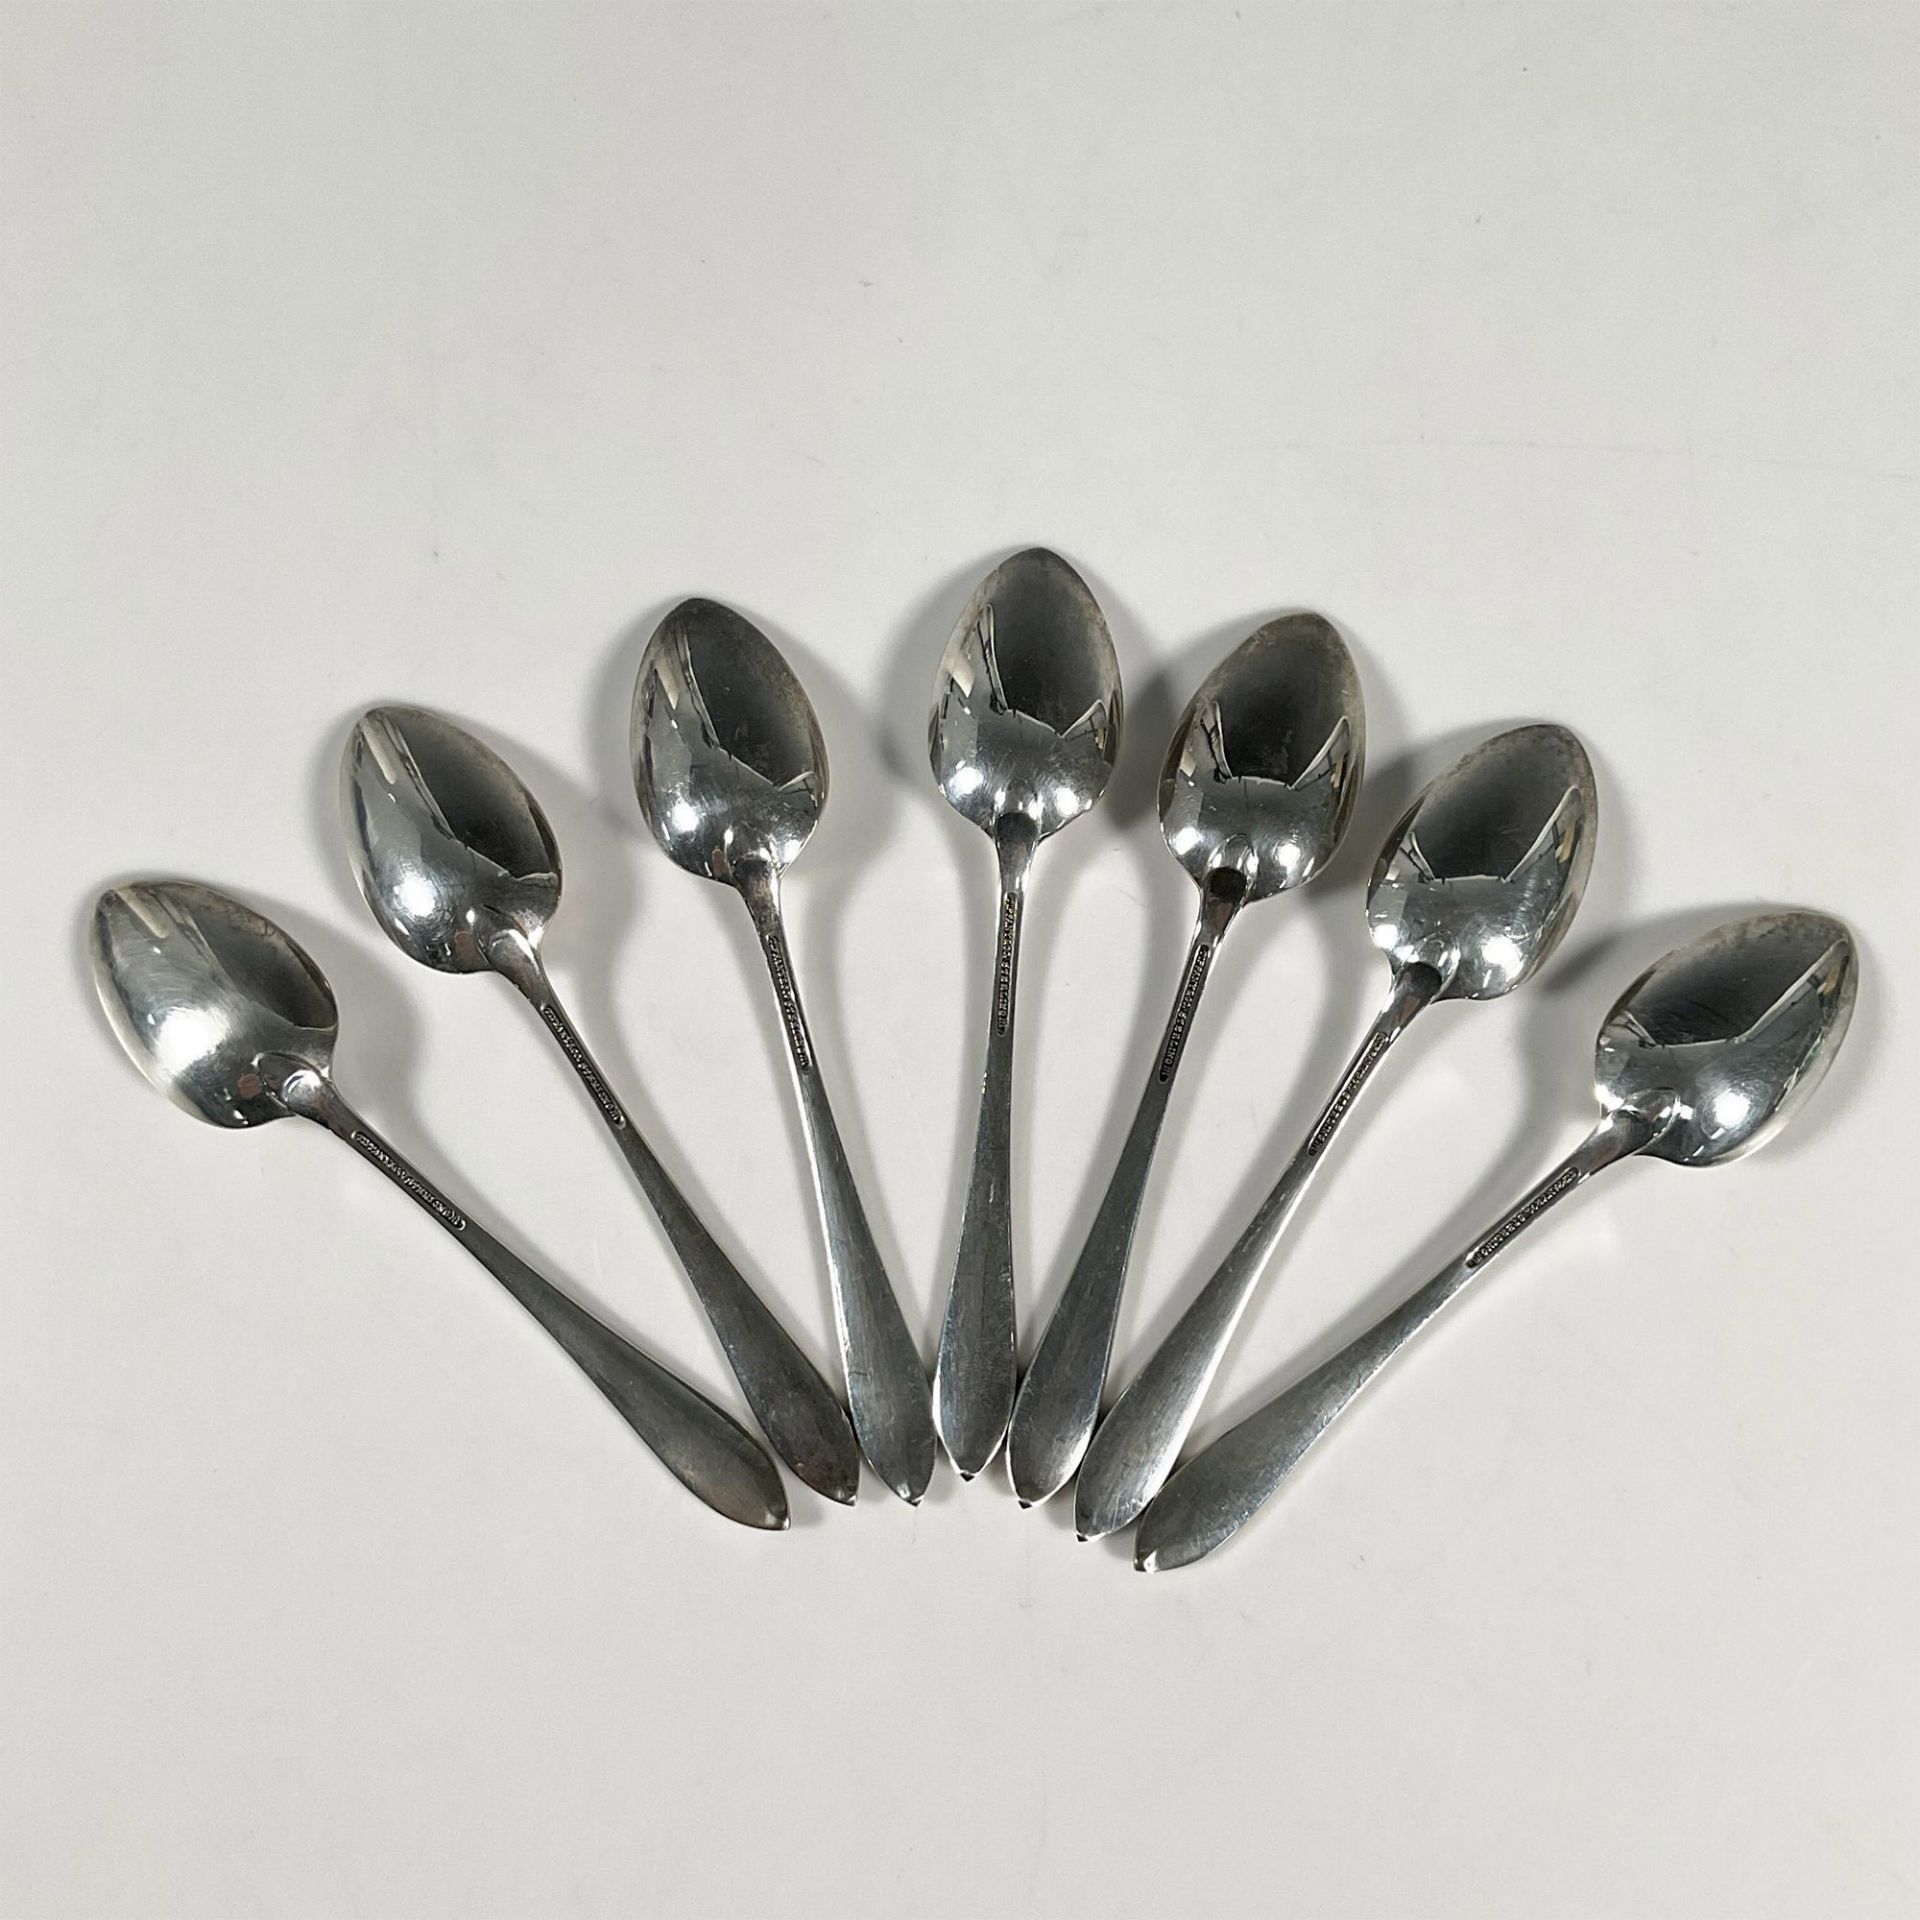 7pc Tiffany And Co. Sterling Silver Demitasse Spoons - Image 3 of 4